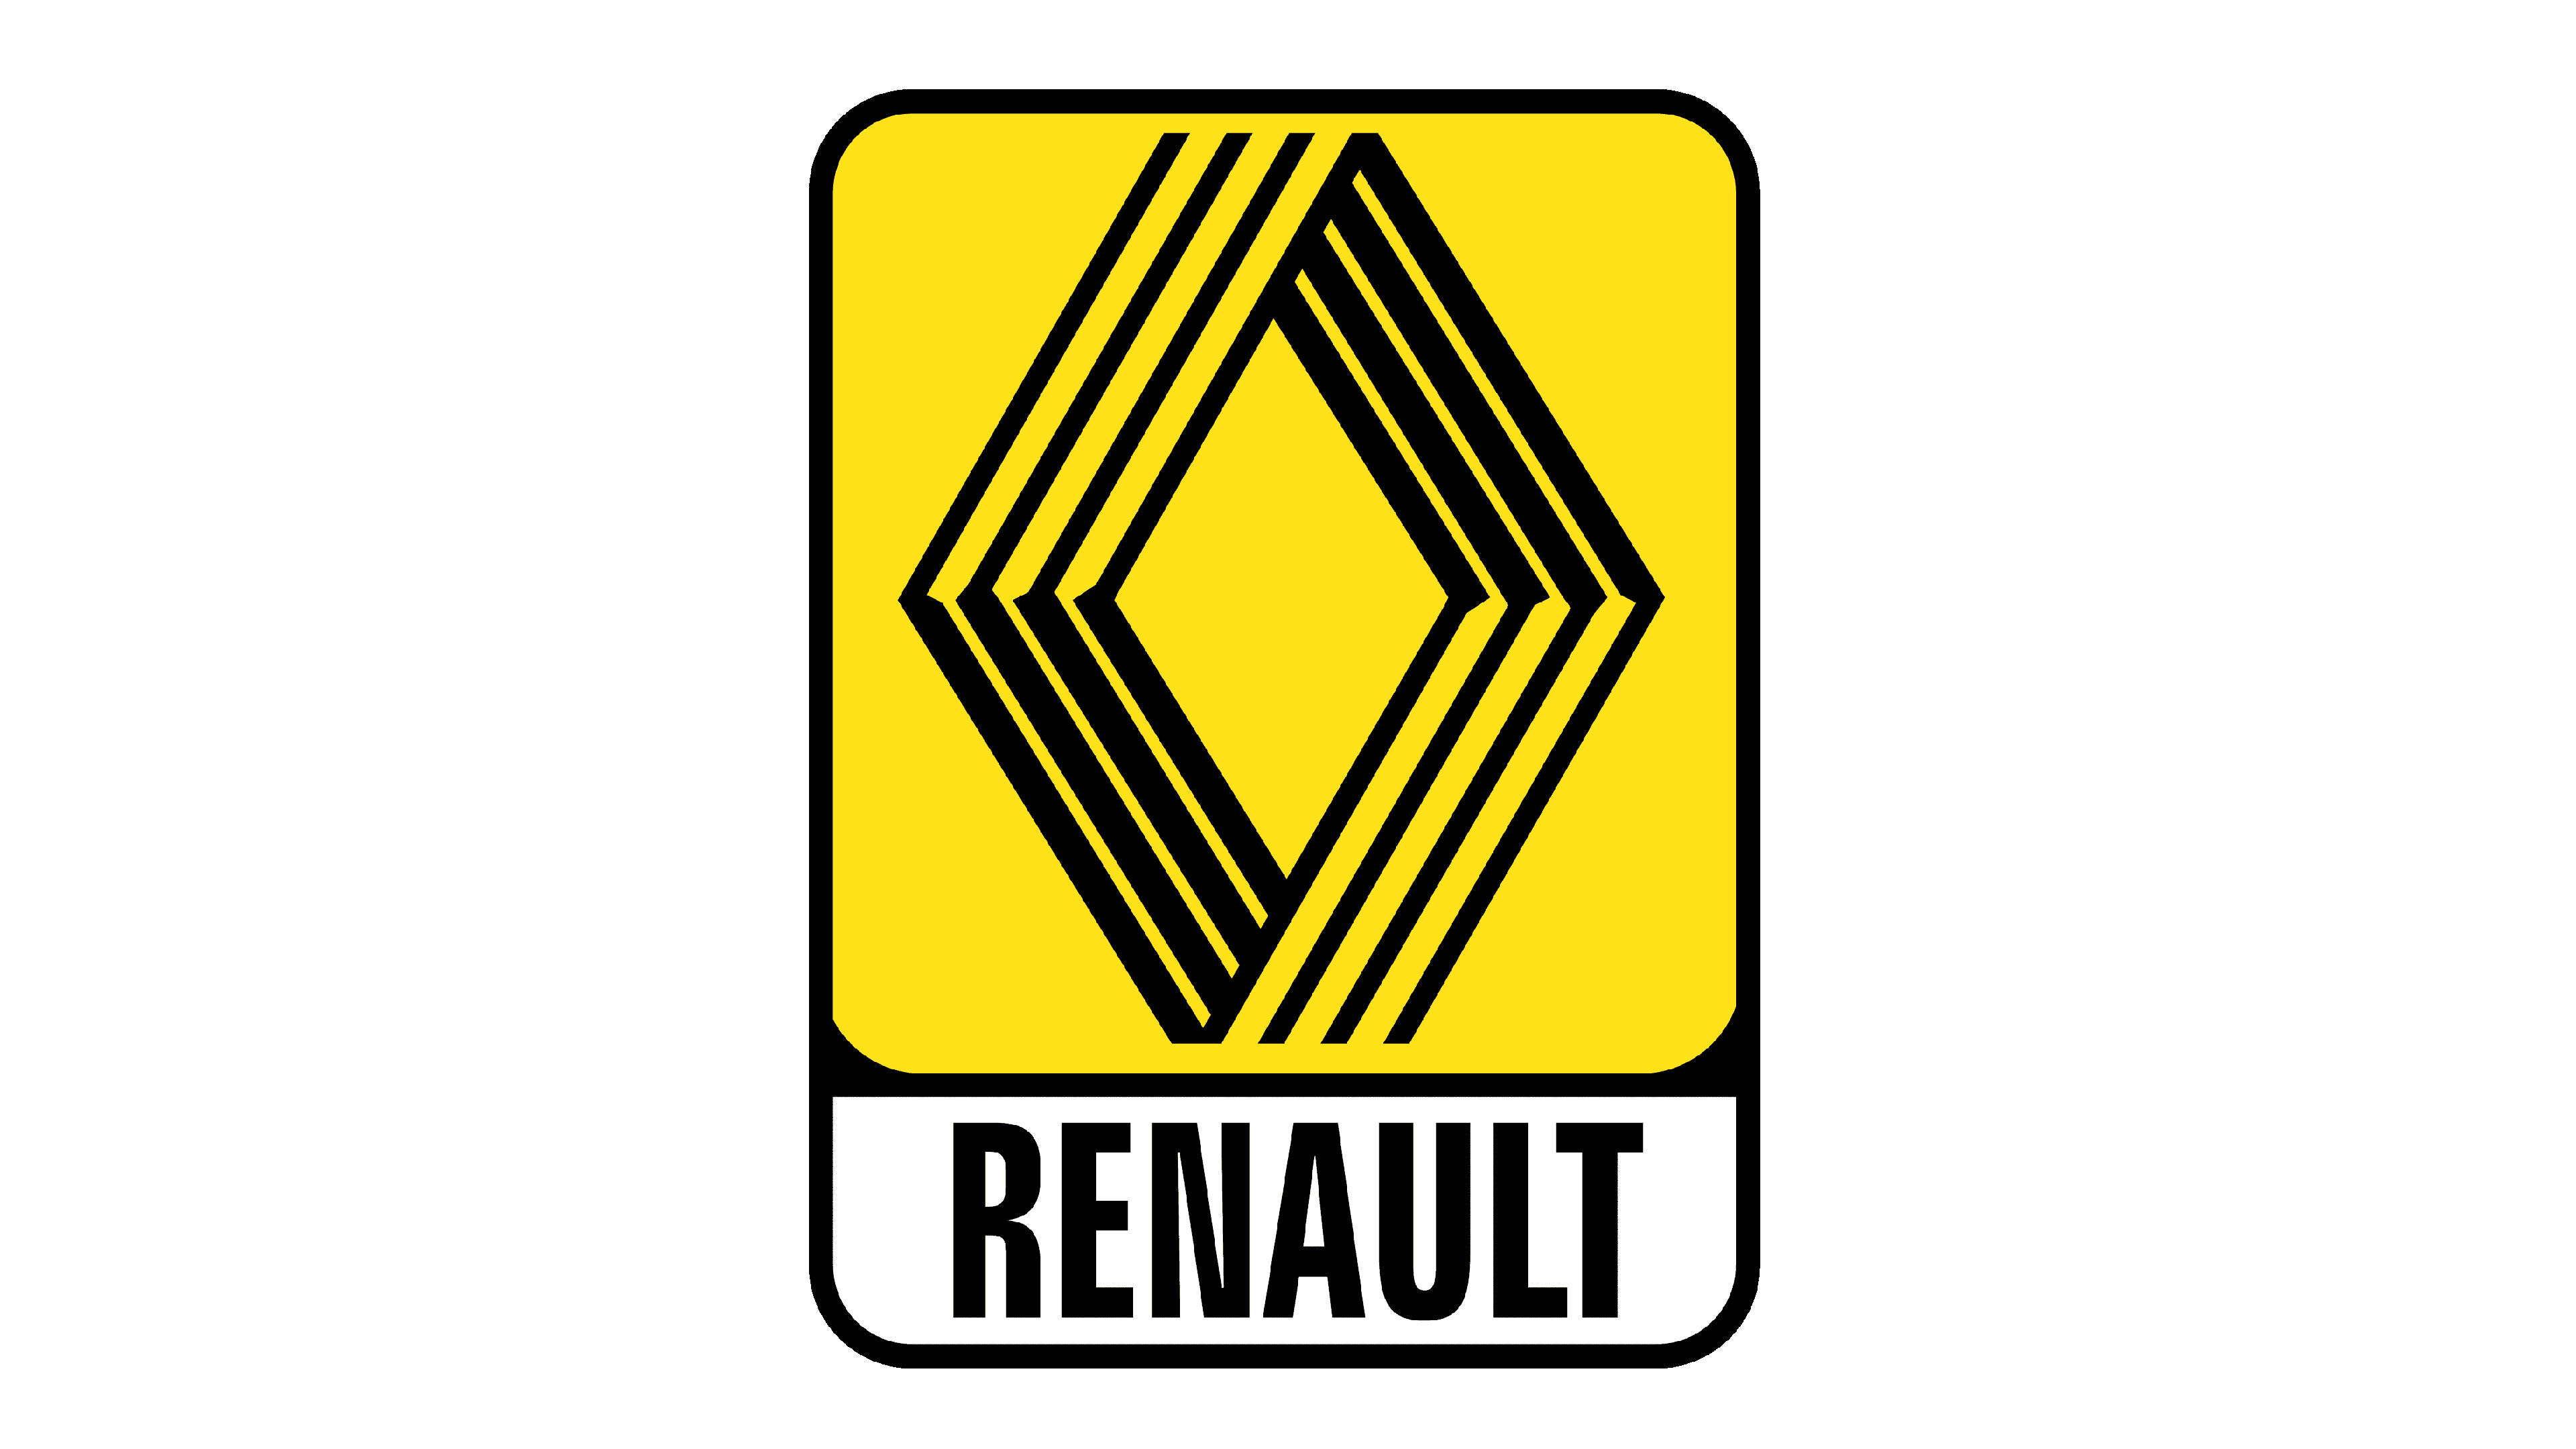 Renault Logo and Car Symbol Meaning